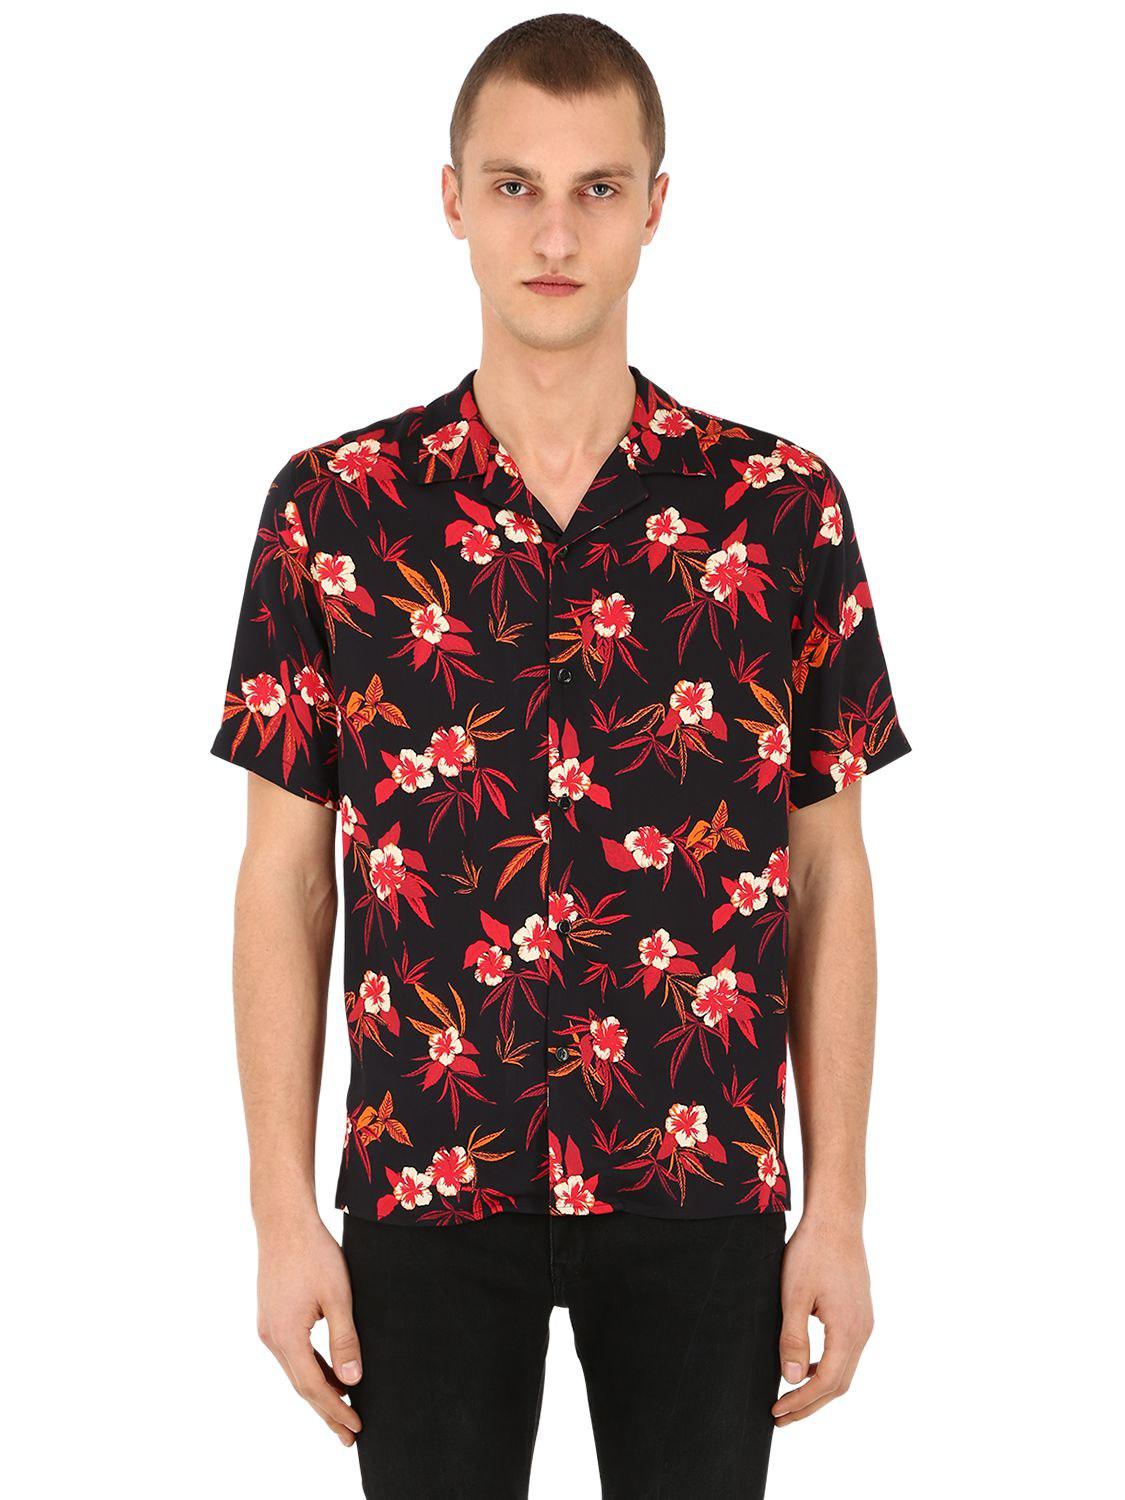 Lyst - The Kooples Hawaiian Printed Viscose Shirt in Red for Men